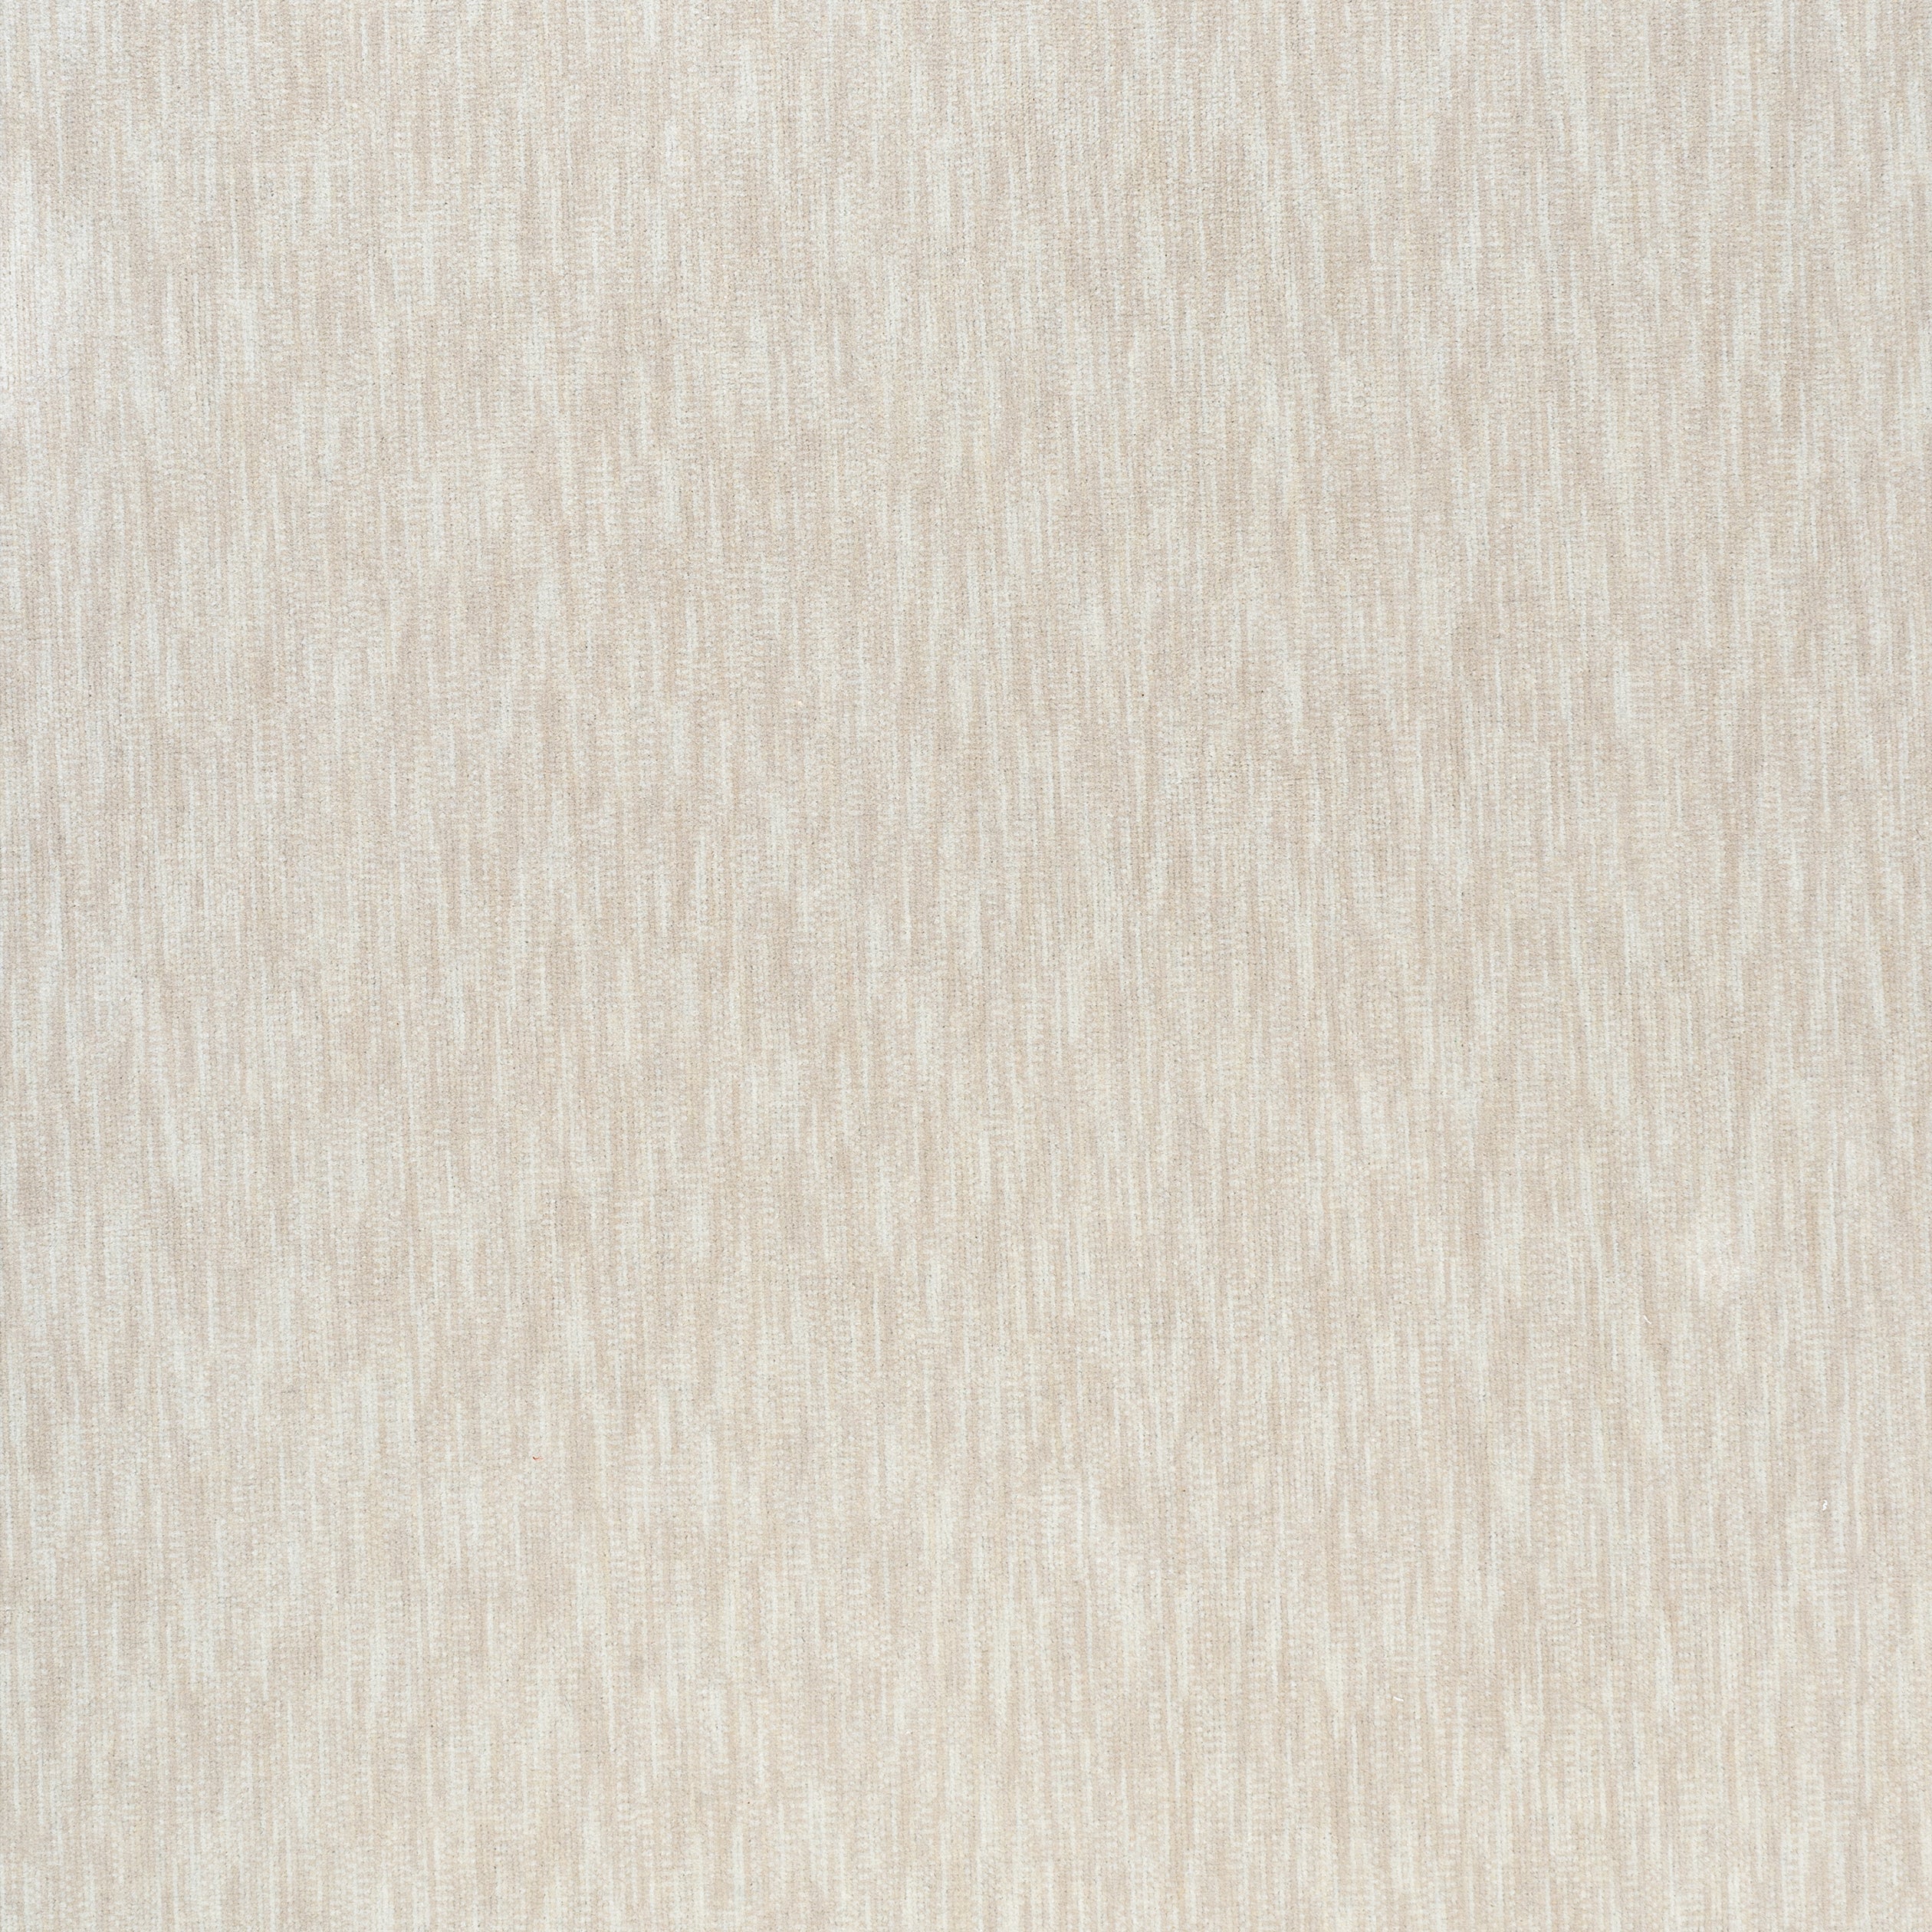 Riff Velvet fabric in oyster color - pattern number W72831 - by Thibaut in the Woven Resource 13: Fusion Velvets collection